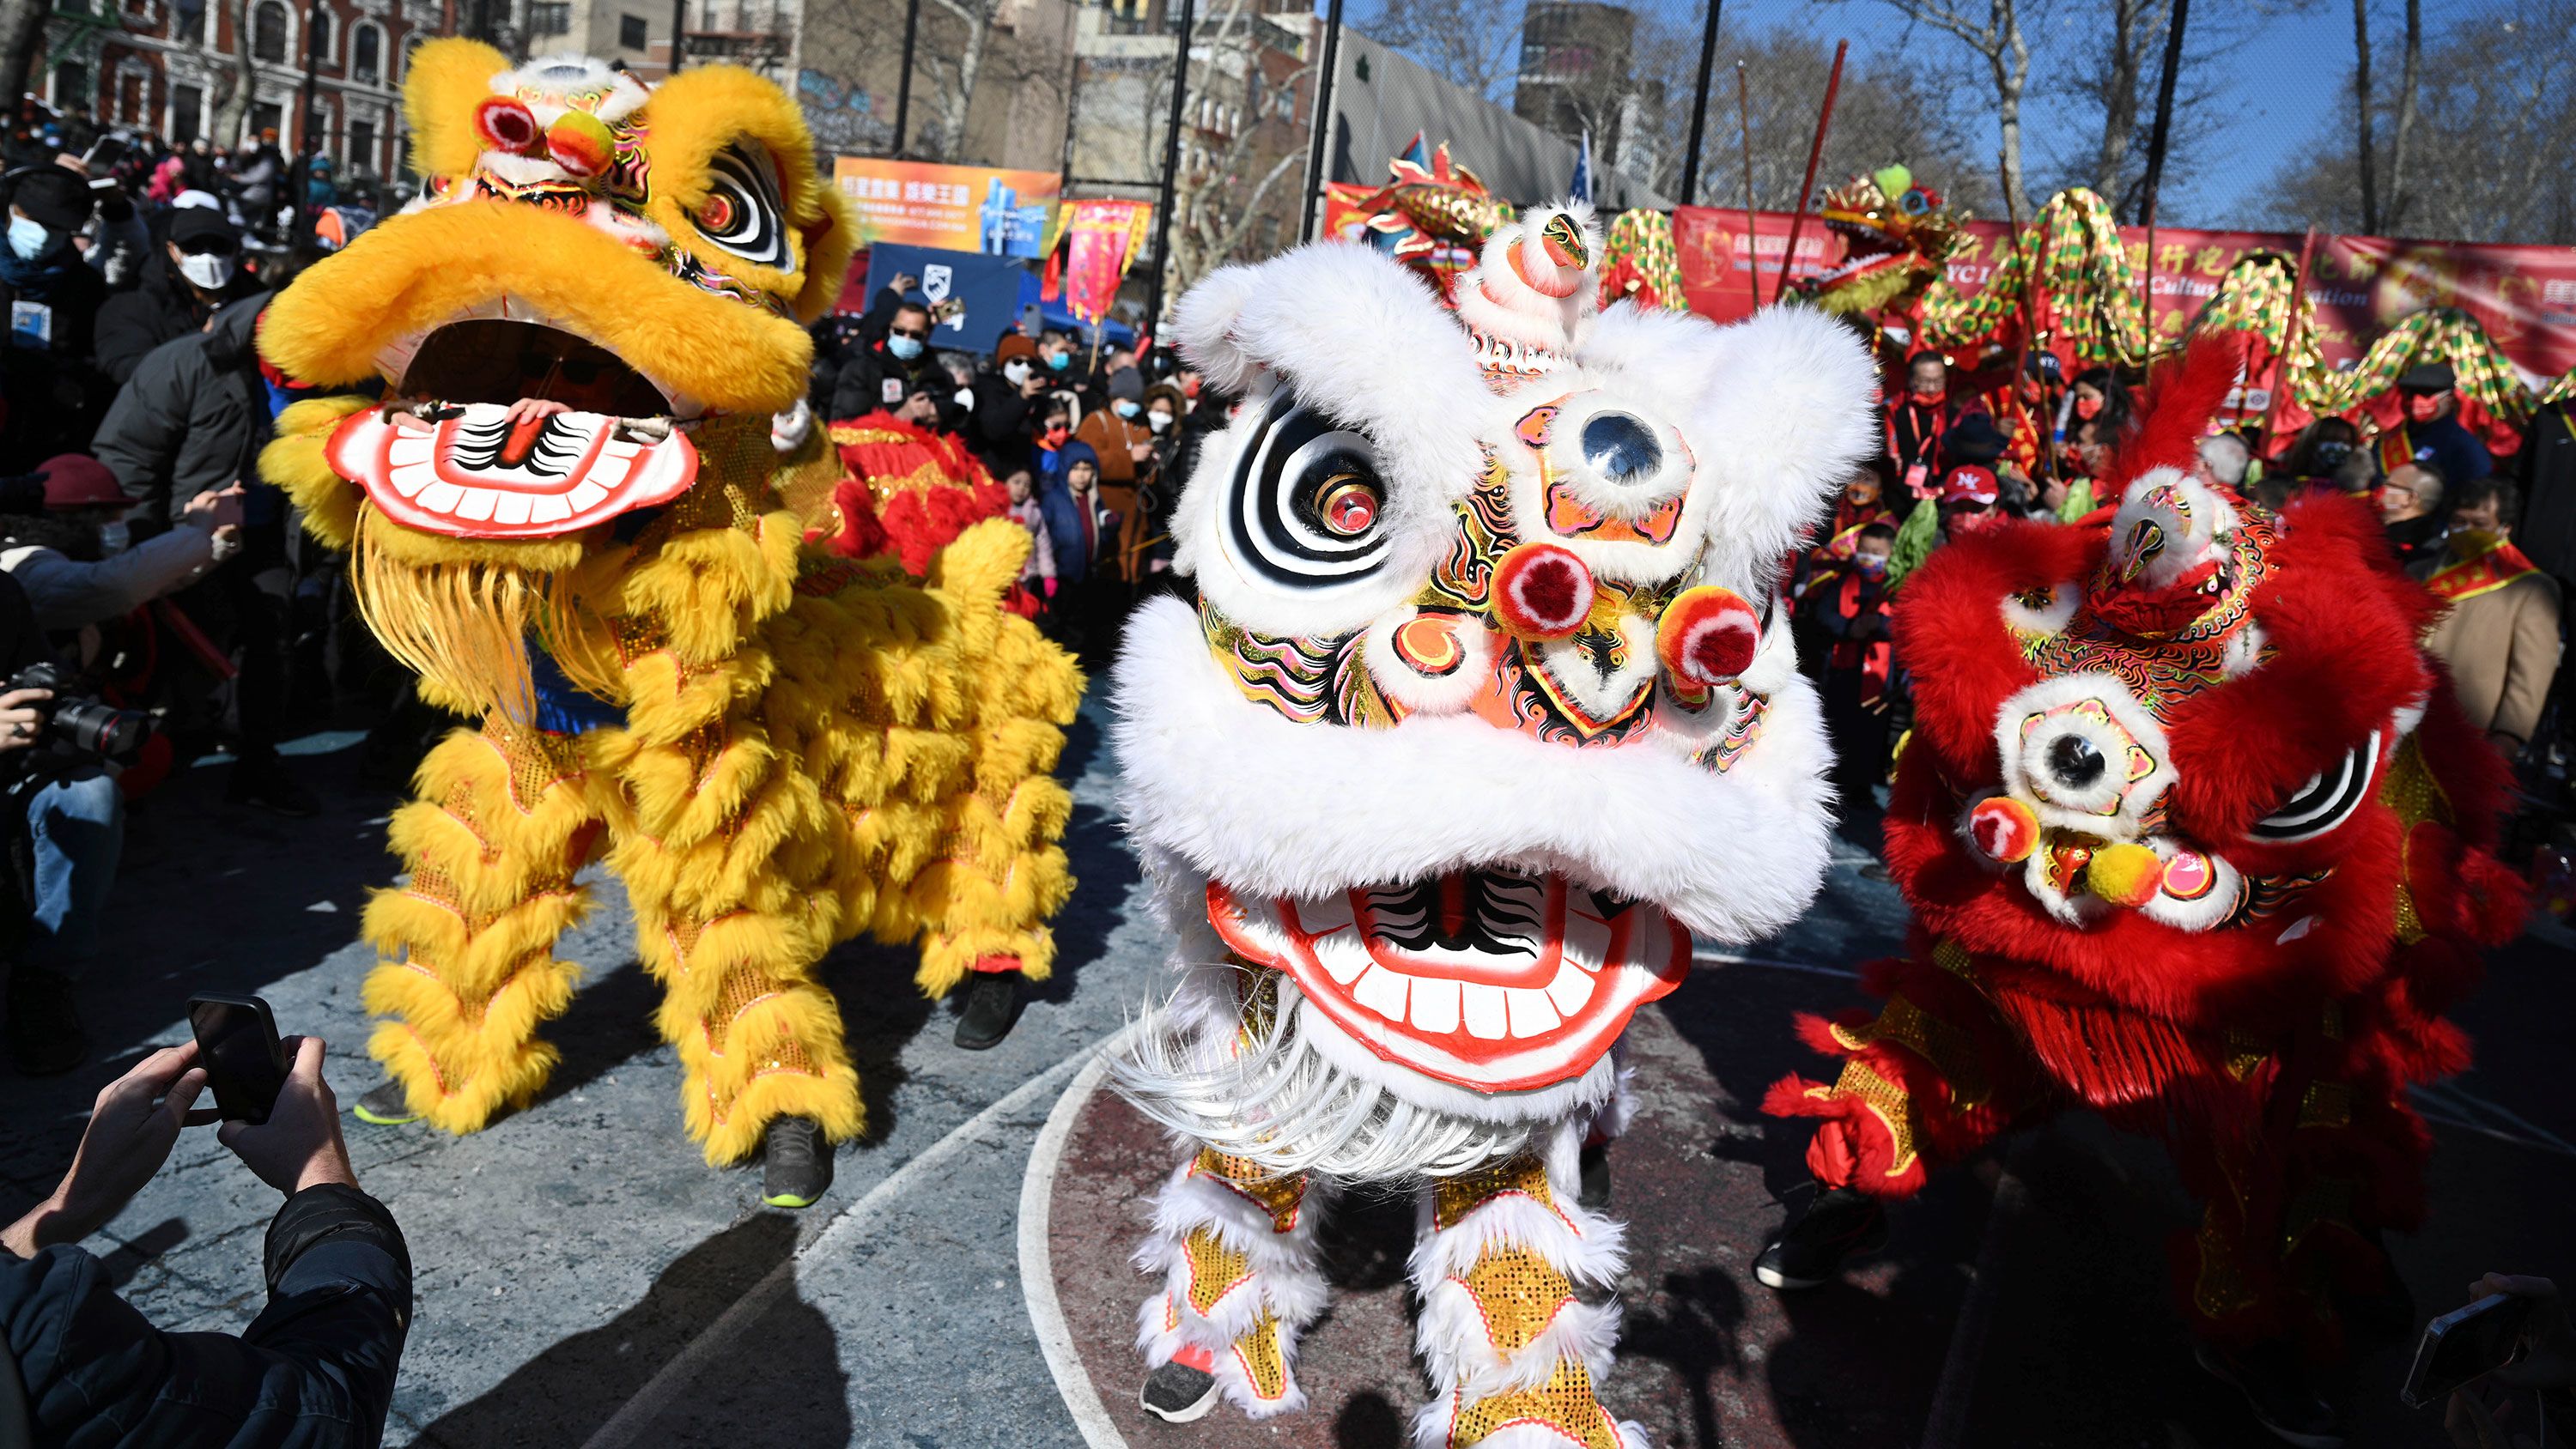 Celebrate Lunar New Year in Philly: Lion dances, dumpling making and more